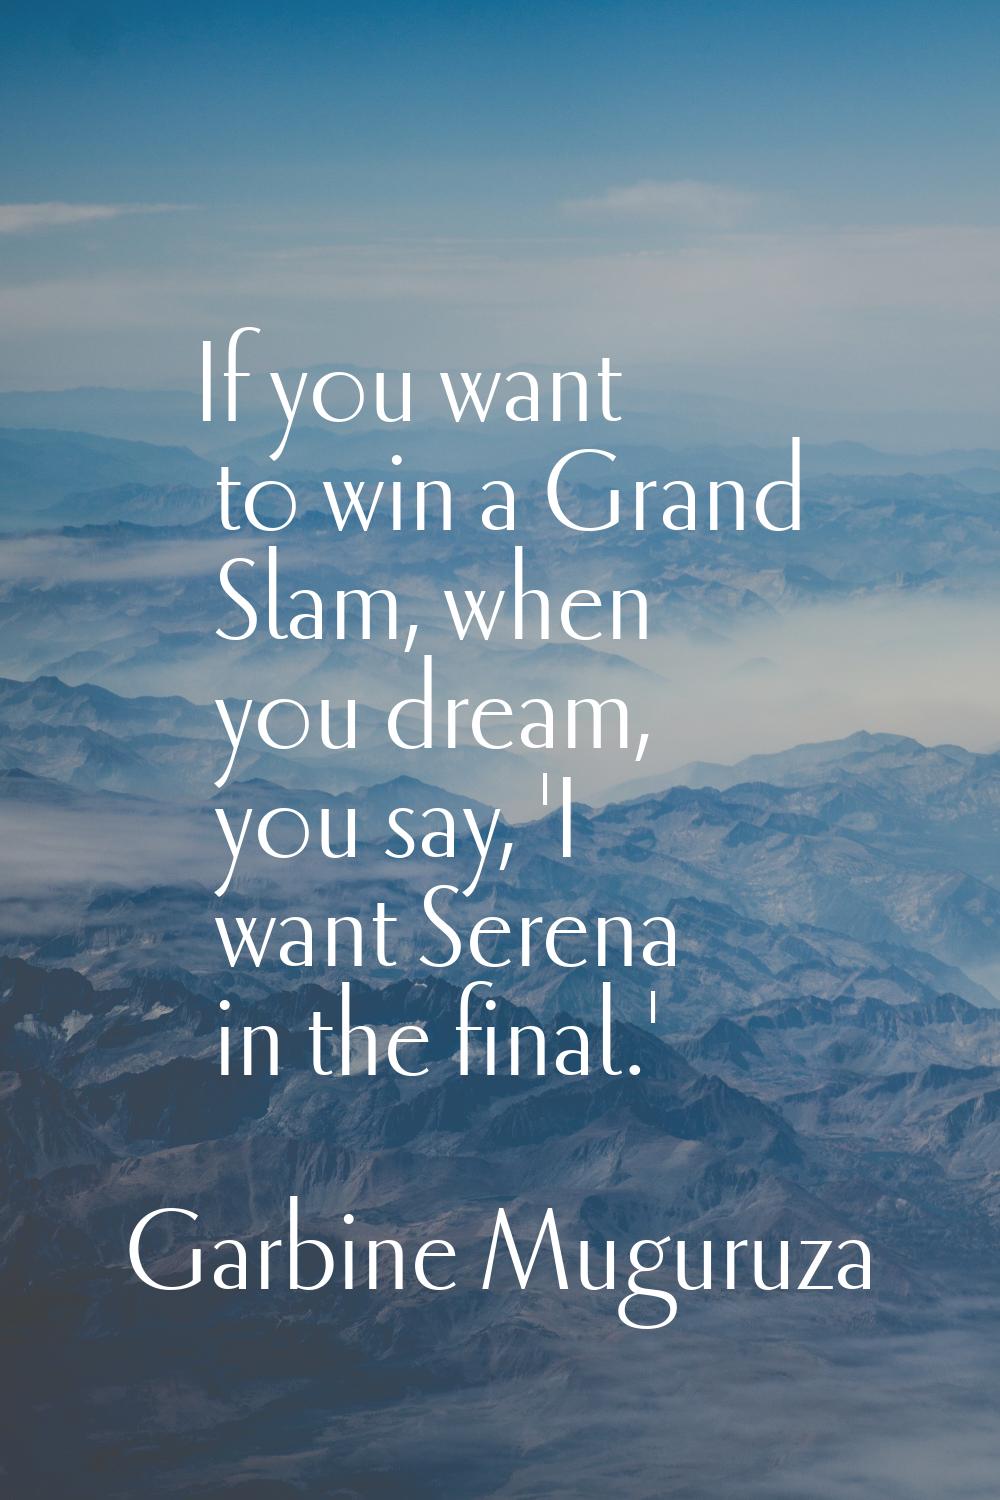 If you want to win a Grand Slam, when you dream, you say, 'I want Serena in the final.'